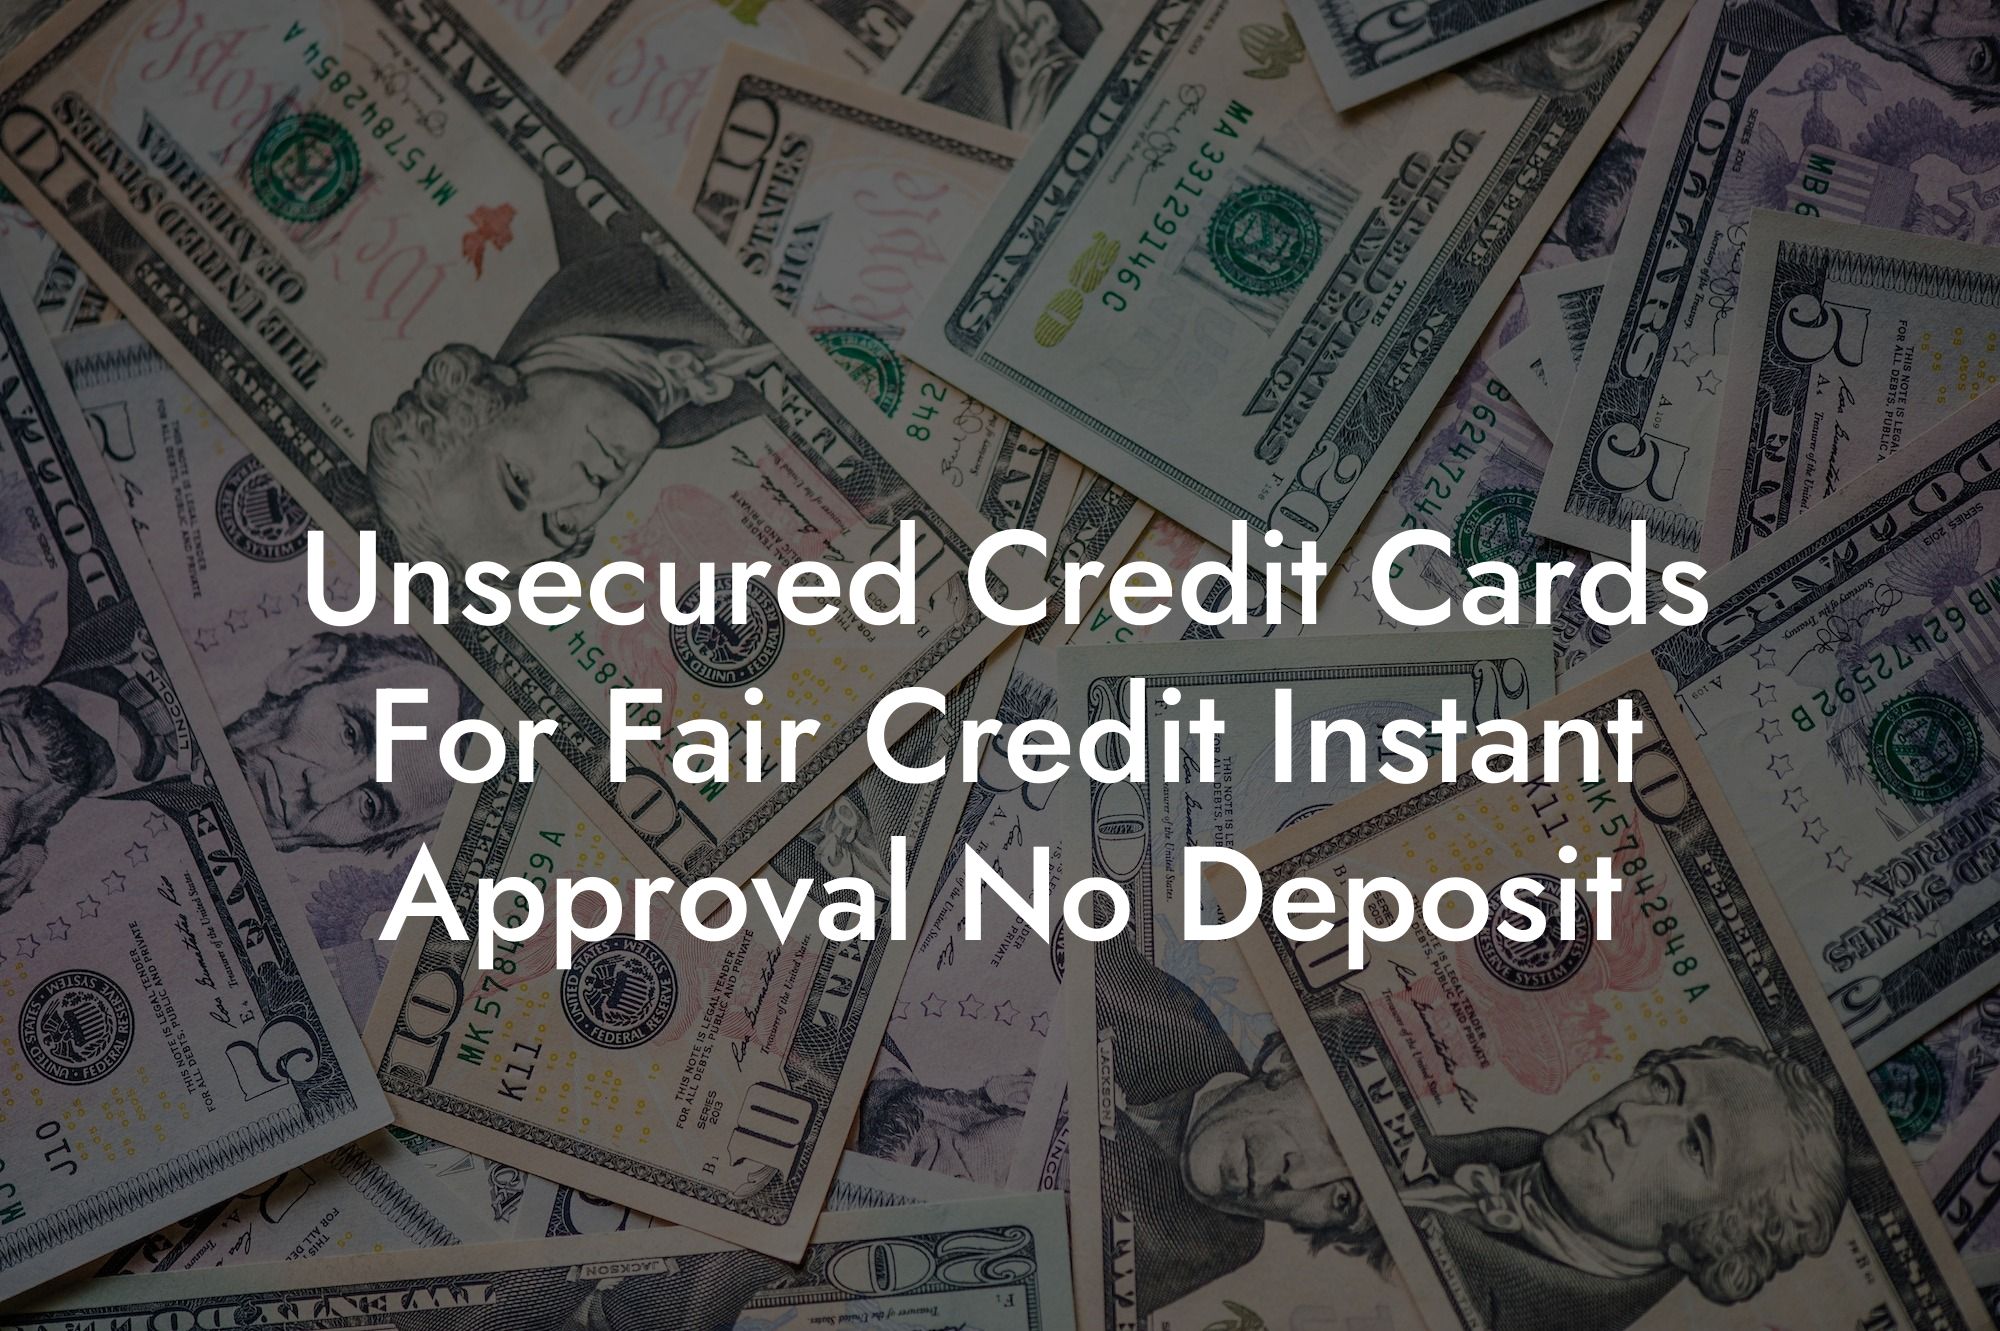 Unsecured Credit Cards For Fair Credit Instant Approval No Deposit